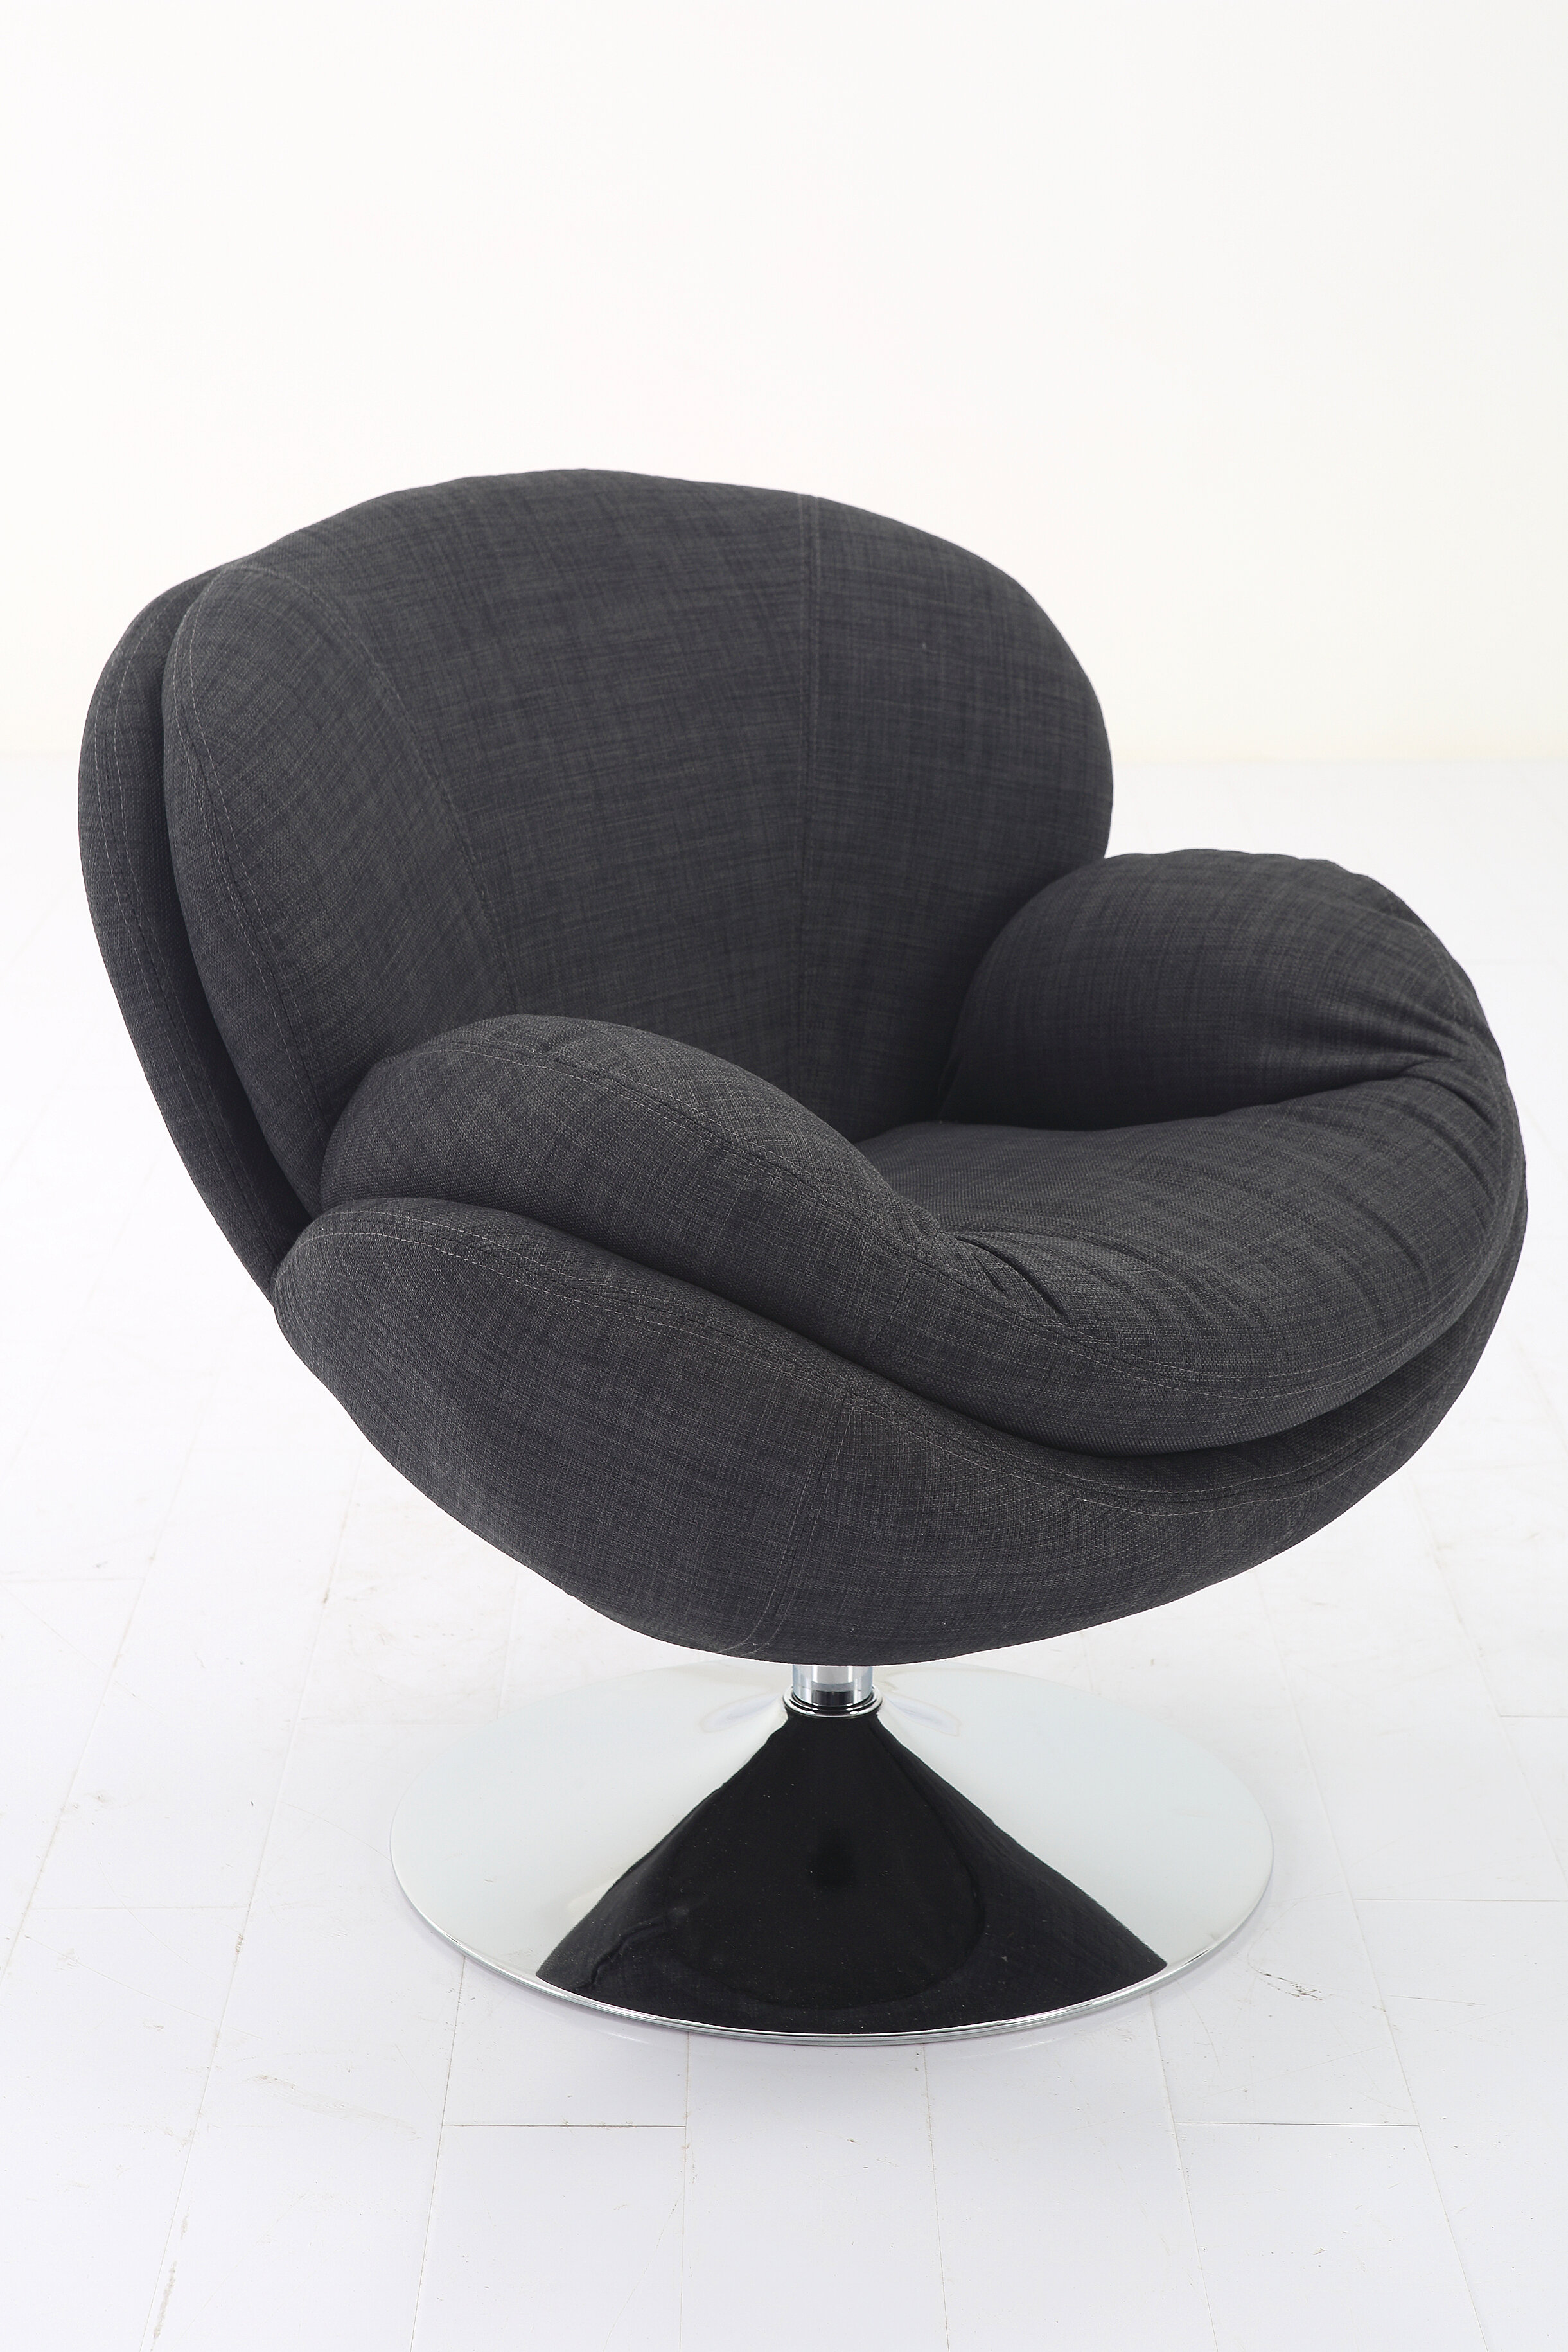 comfy chair grey fabric modern occasional bedroom chair